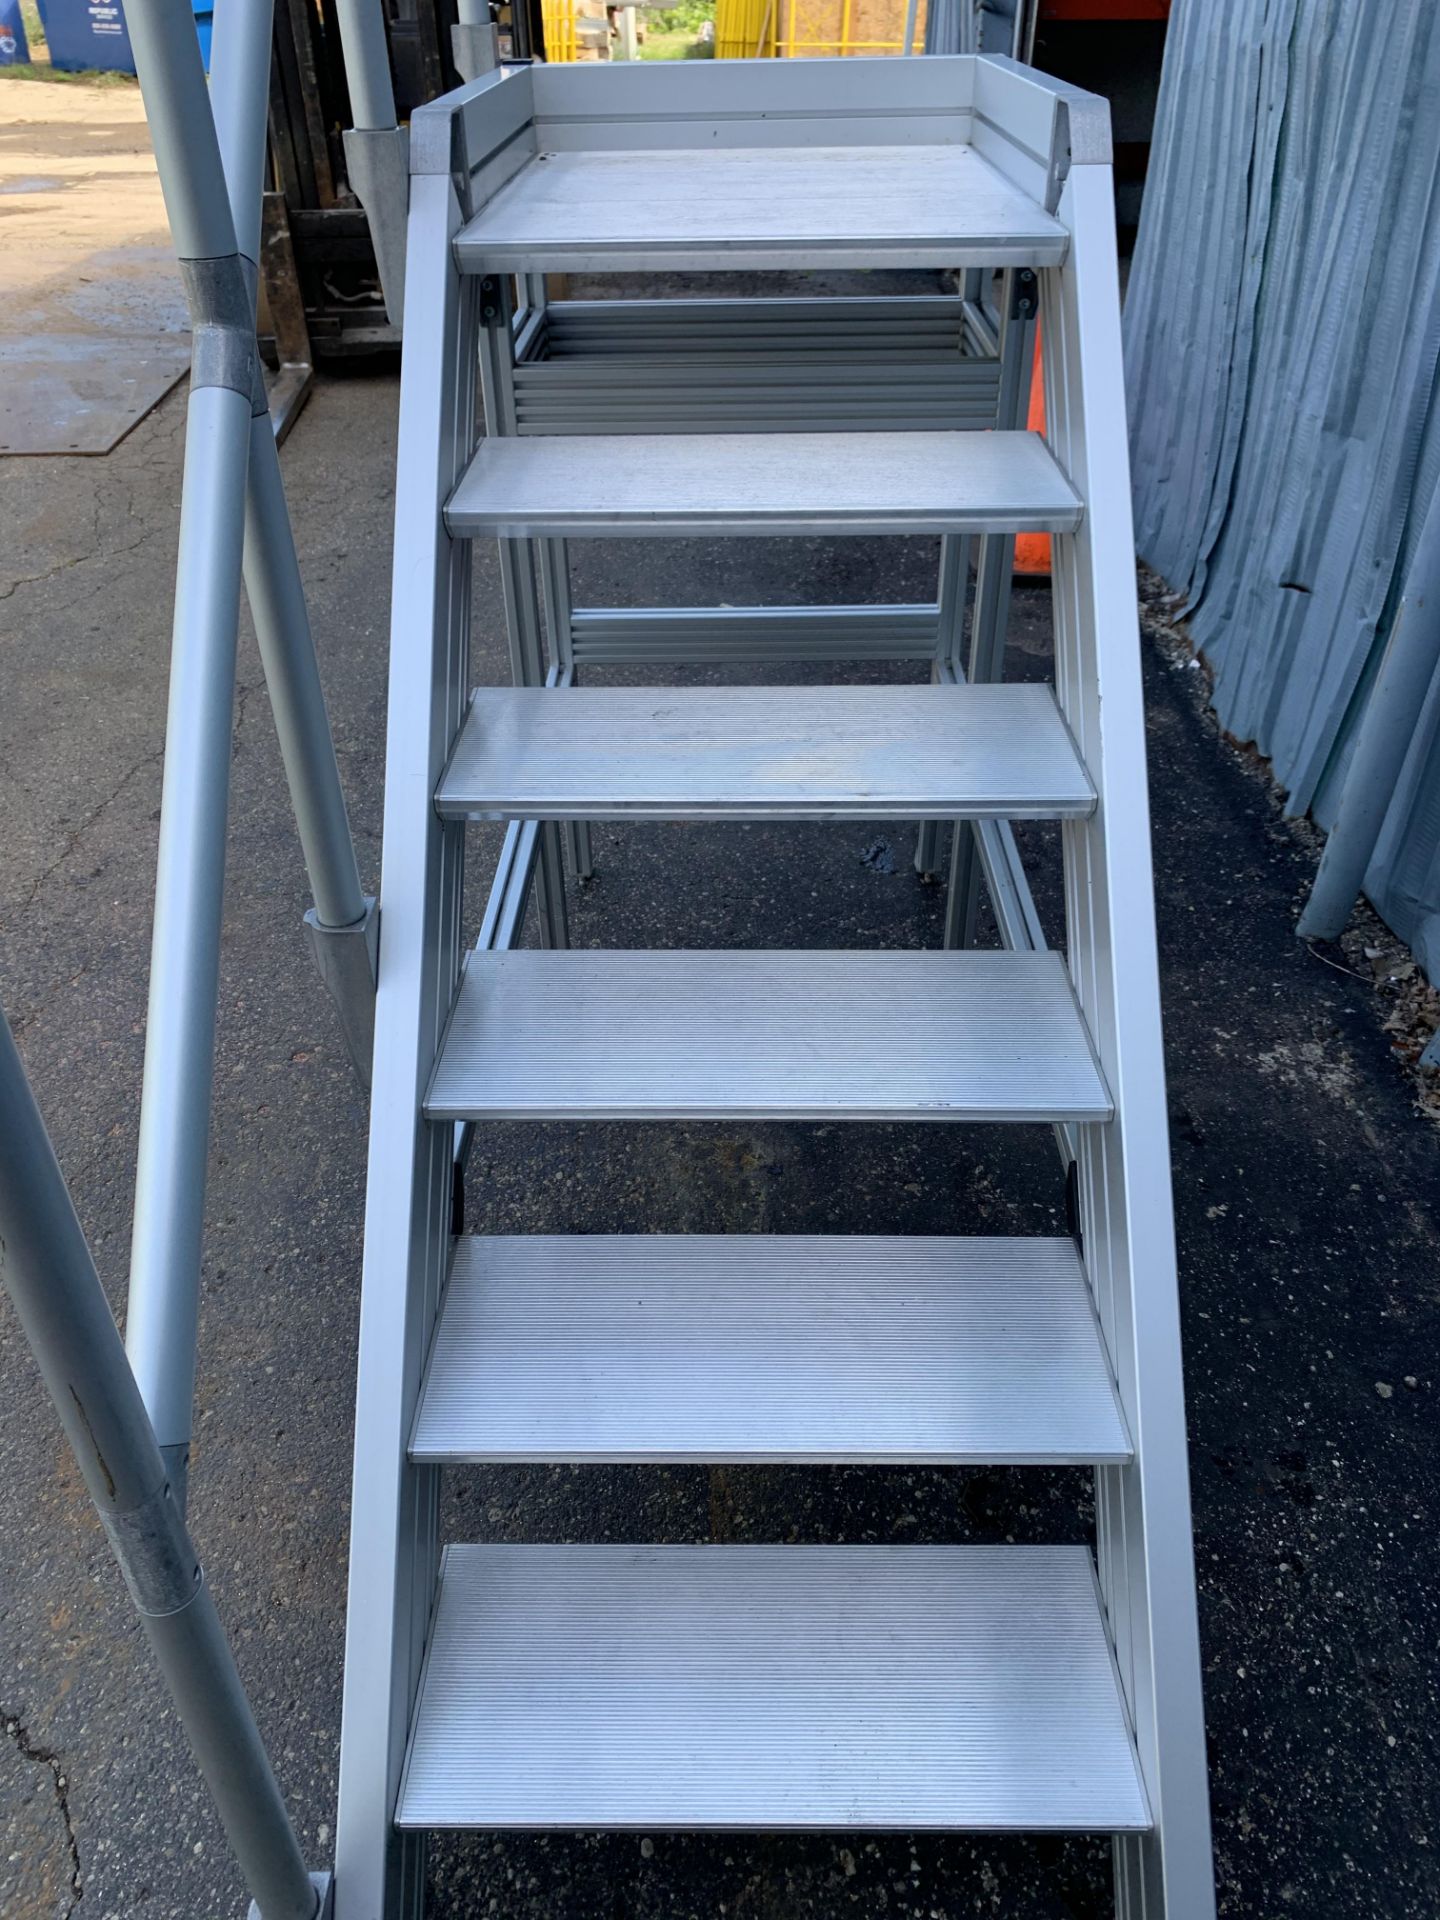 UNKNOWN BRAND ALUMINUM STAIRS WITH RAIL, 6-STEPS, TOP PLATFORM STEP 50" HIGH - Image 7 of 8